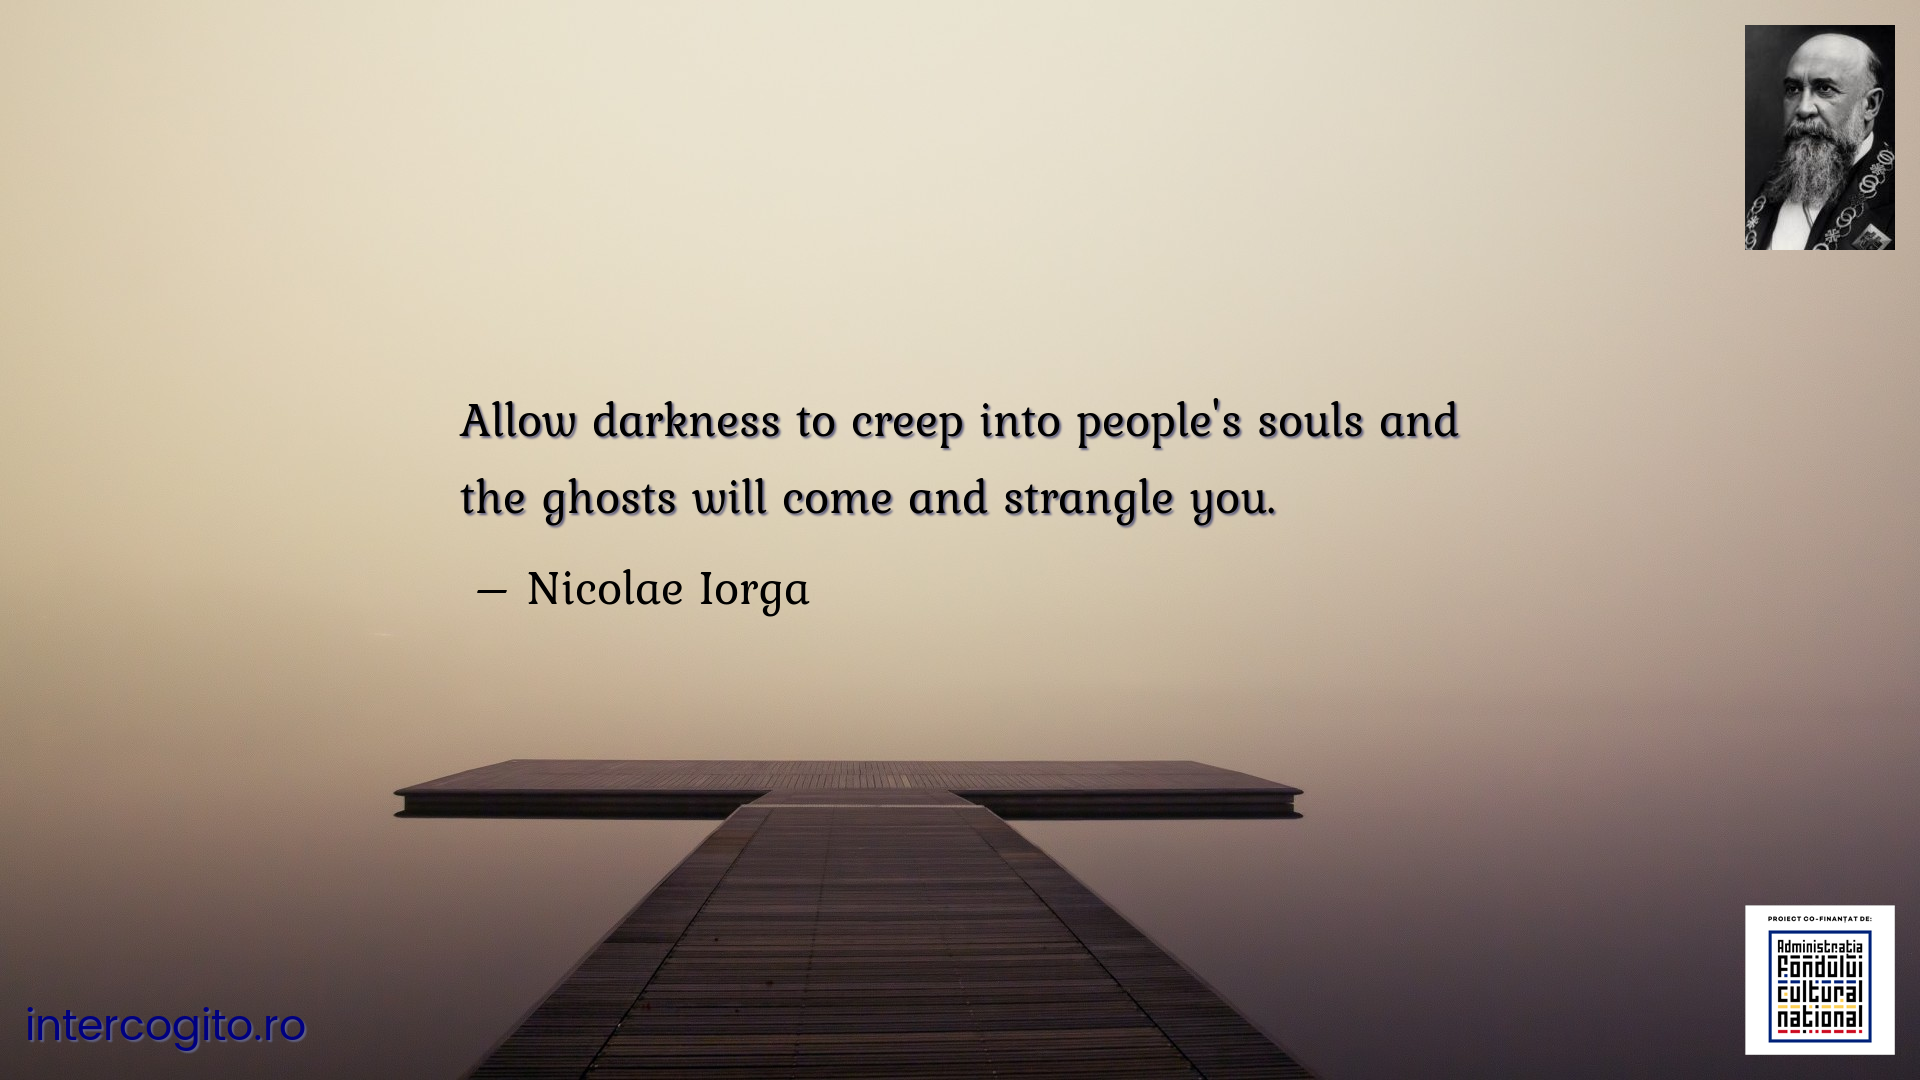 Allow darkness to creep into people's souls and the ghosts will come and strangle you.